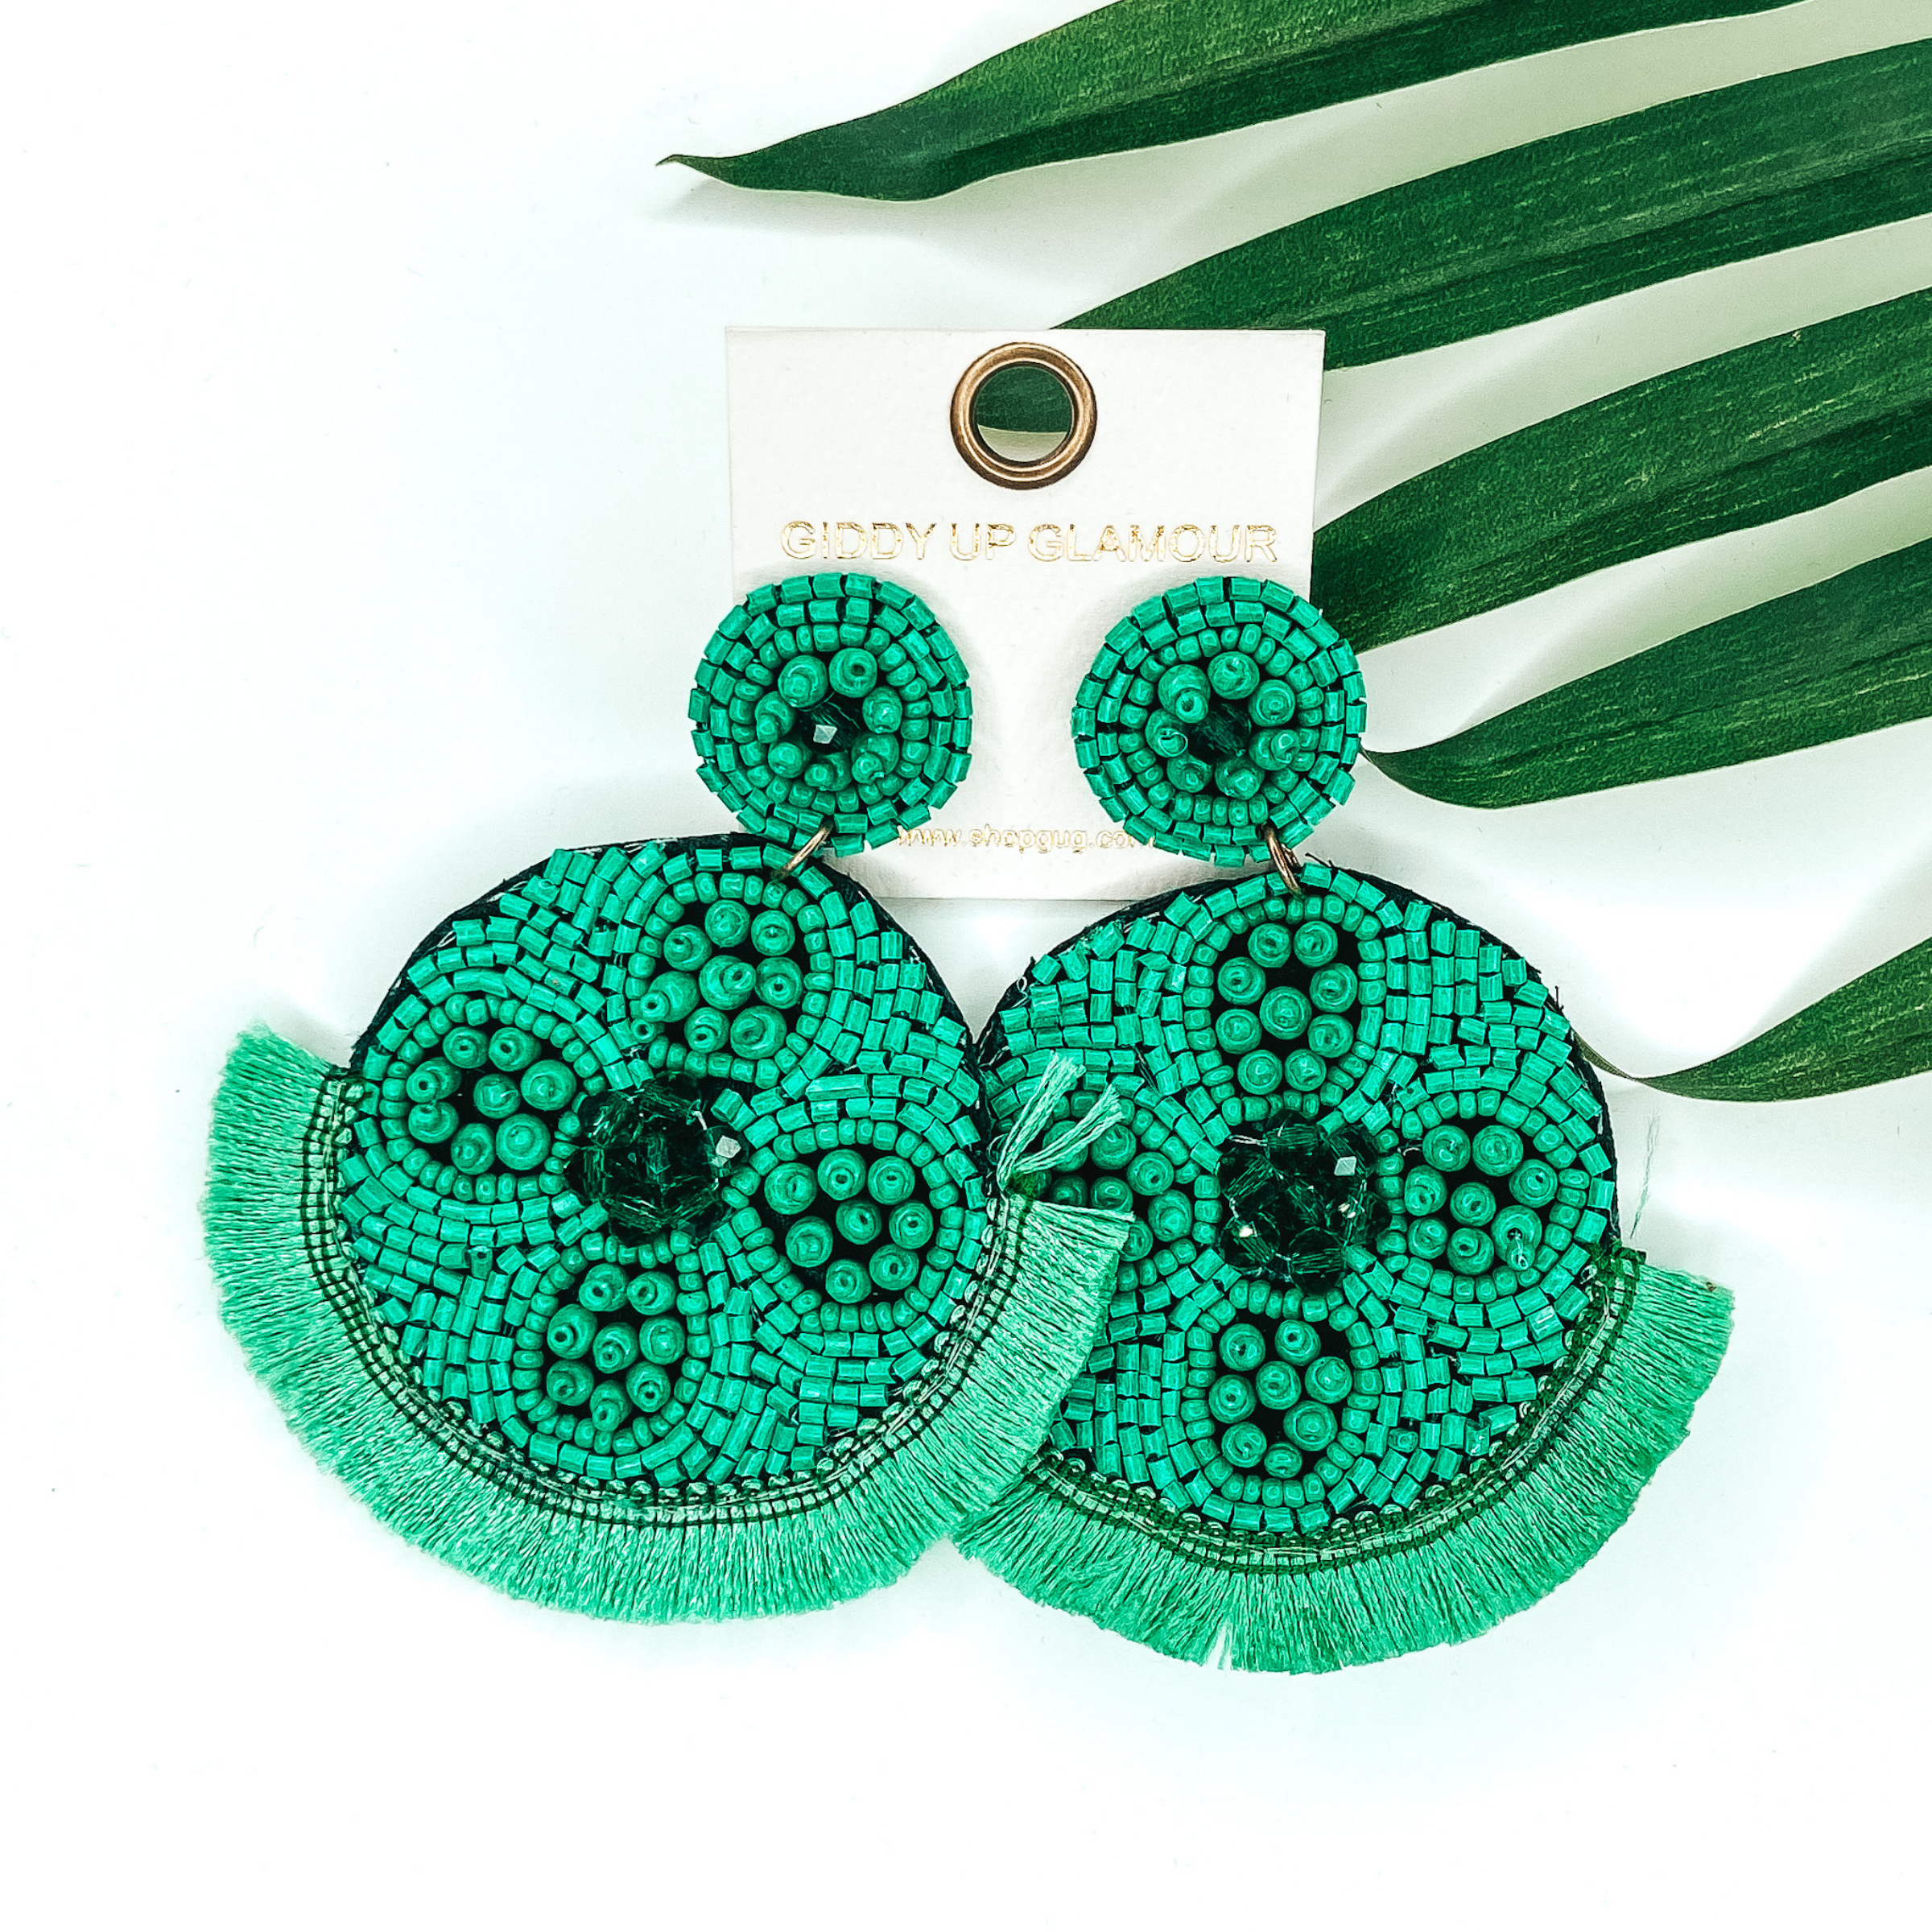 Turquoise beaded circle post back earrings. Hanging from the earrings are black beaded circle pendant with black fringe. These earrings are pictured on a white background with green leaves behind them.